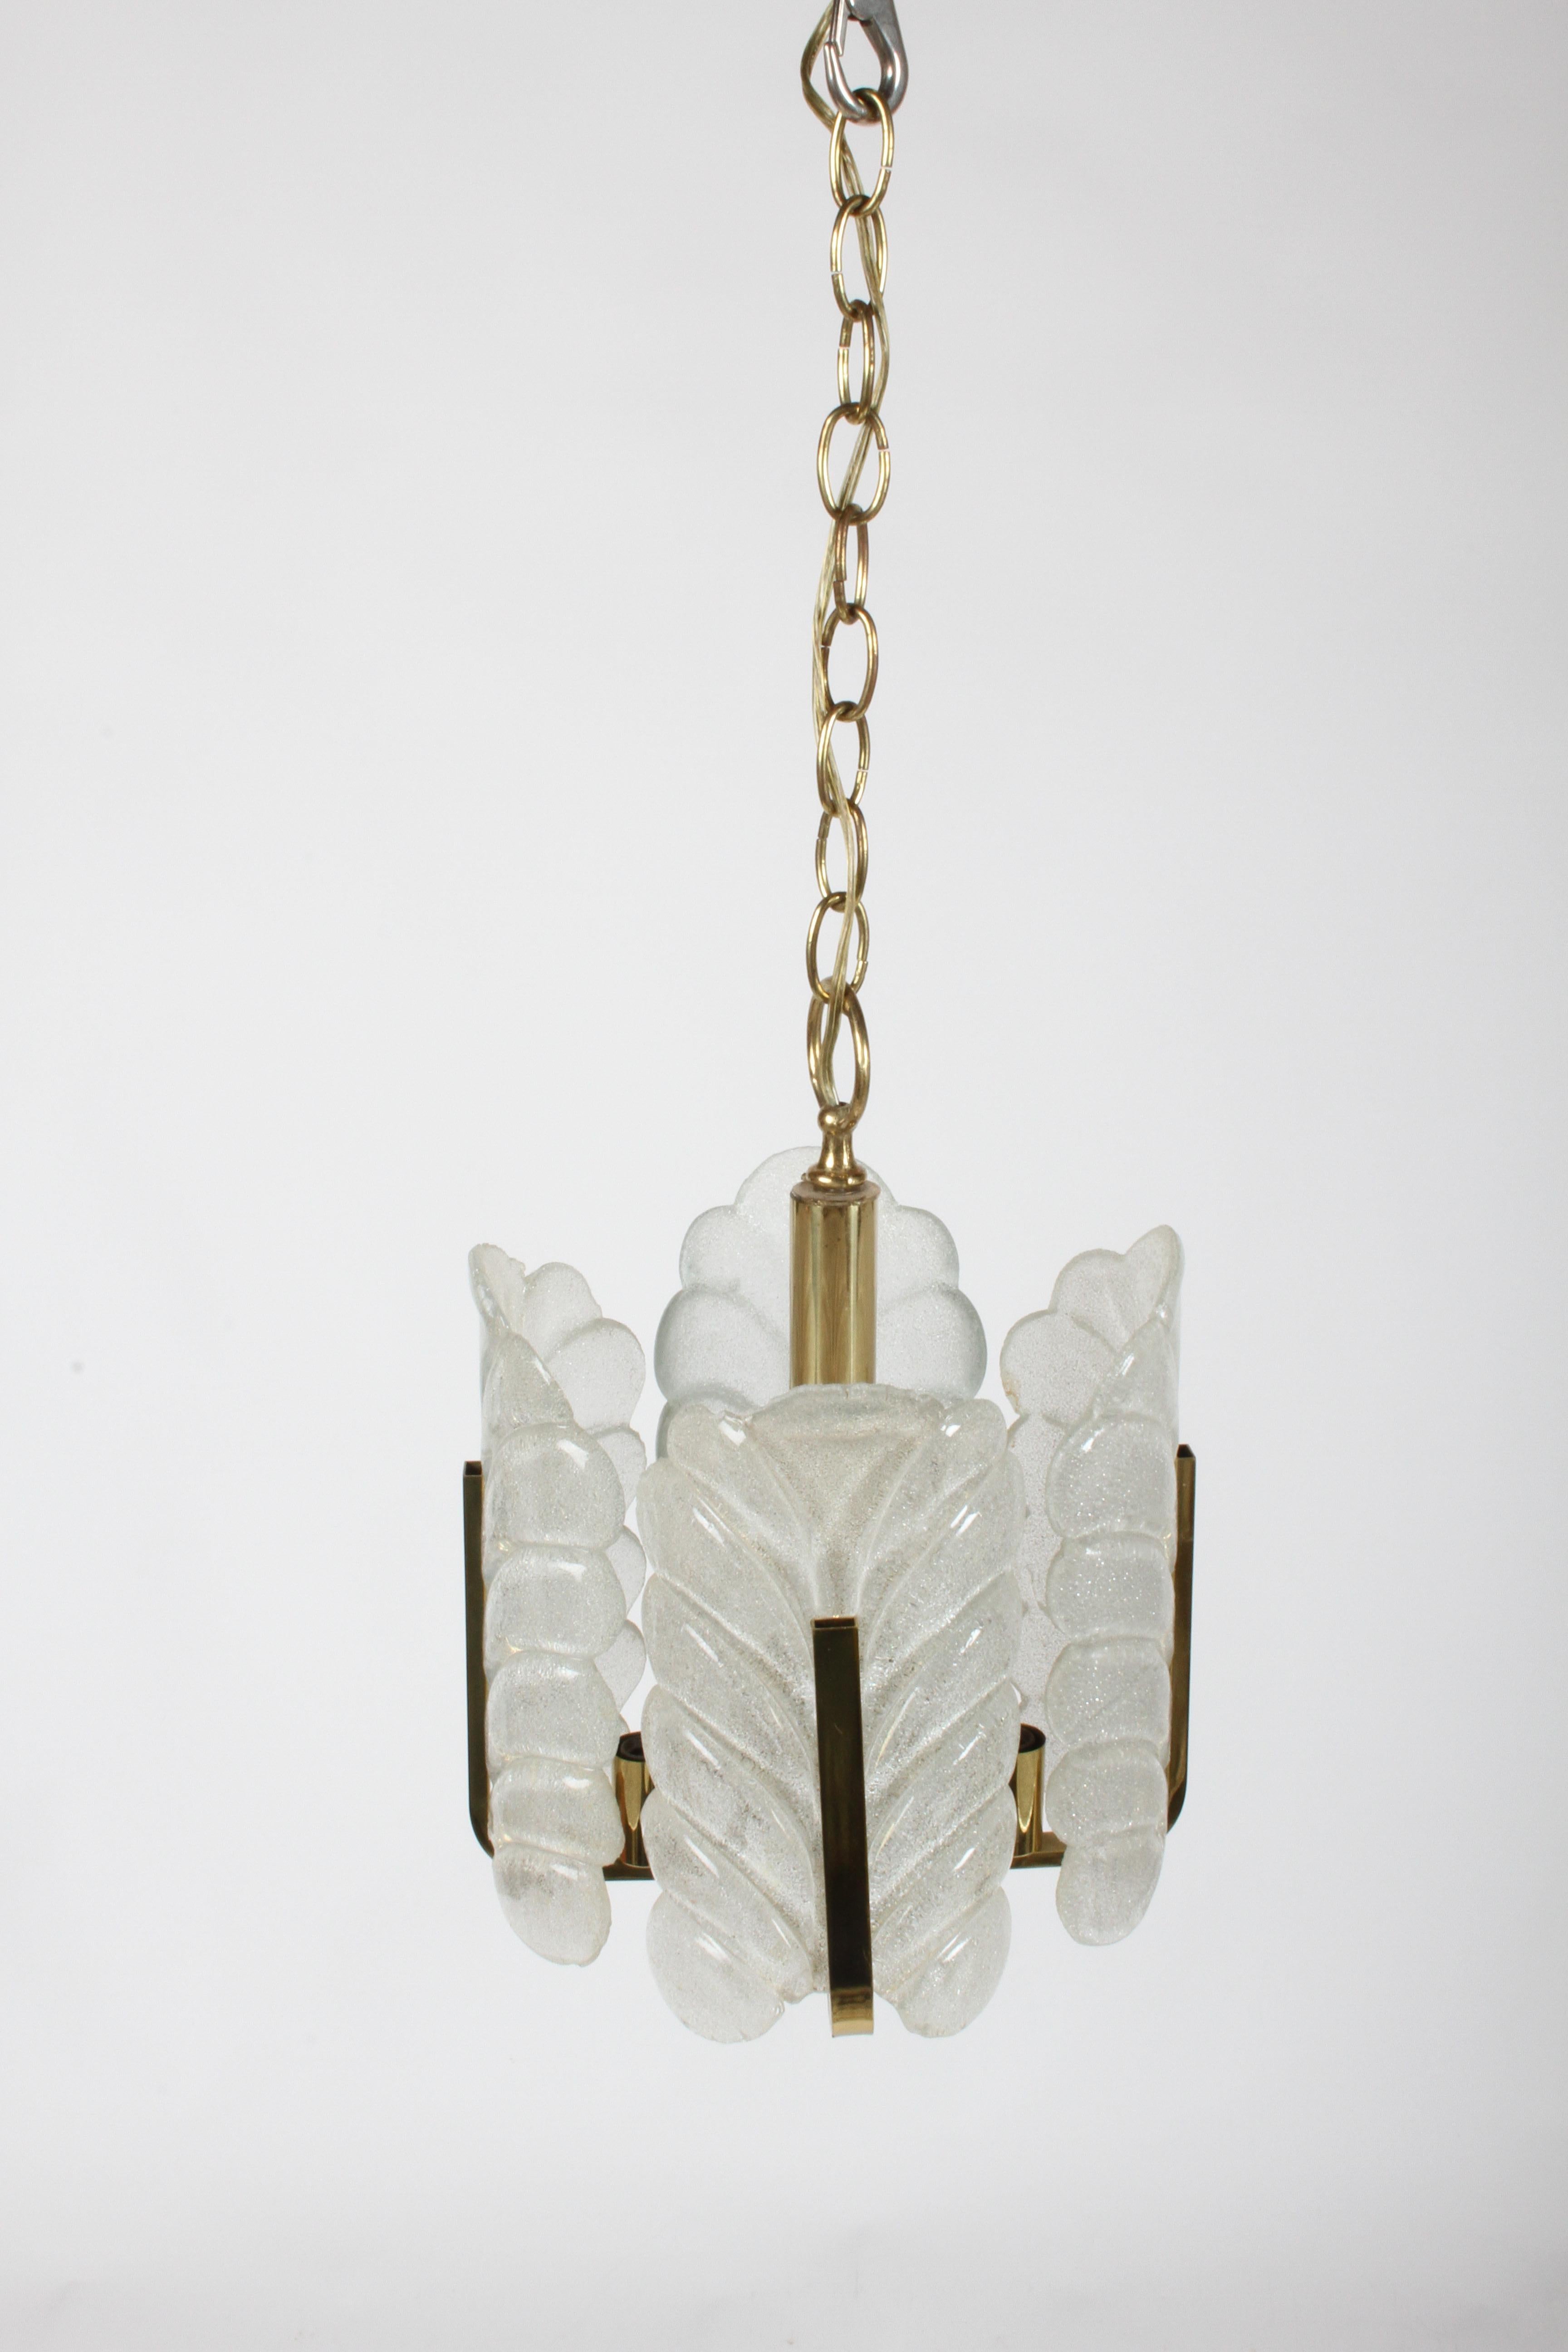 Carl Fagerlund Chandelier for Orrefors Sweden Textured Acanthus Glass Leaves  For Sale 6